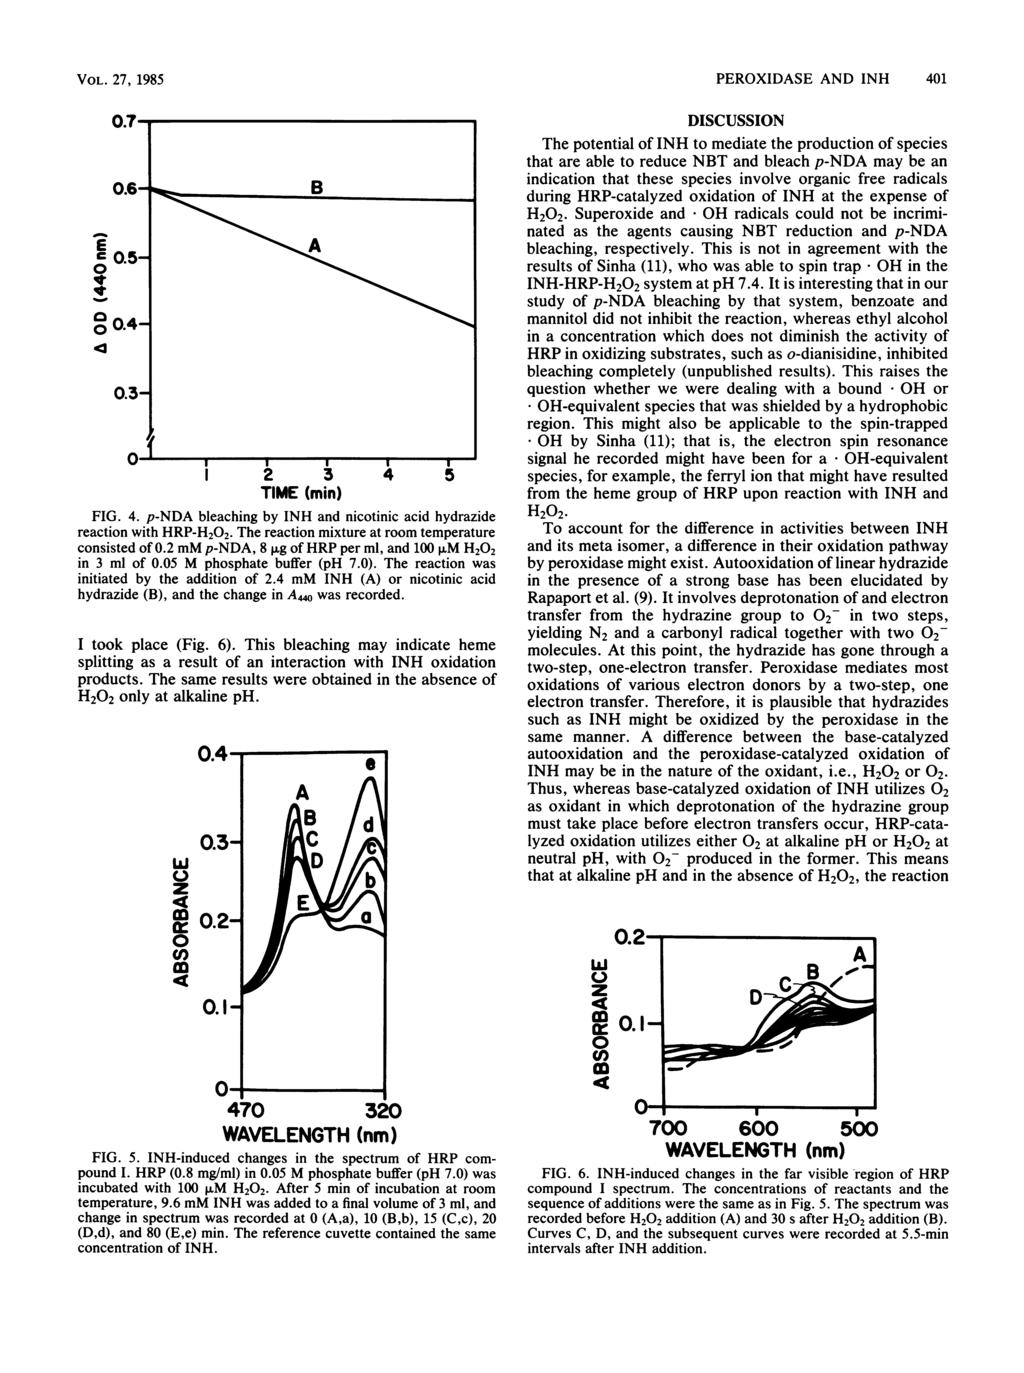 VOL. 27, 1985.7.6 c.5- o4.s O.4.3 1 2 3 TME (min) 1 4 5 FG. 4. p-nda bleaching by NH and nicotinic acid hydrazide reaction with HRP-H22. The reaction mixture at room temperature consisted of.